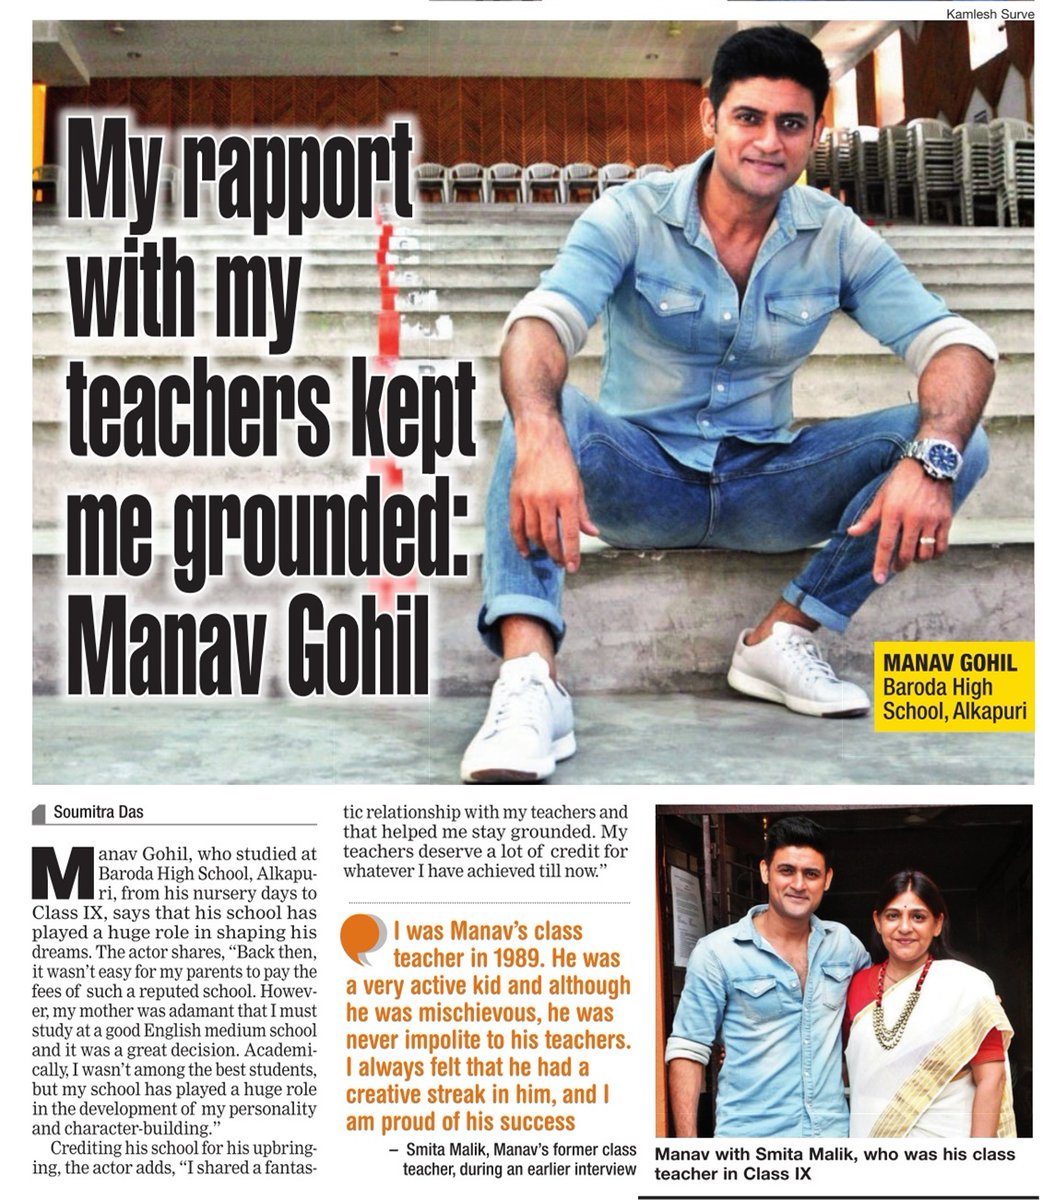 On #TeachersDay, #ManavGohil talks about how his teachers played a huge role in his journey. @manavgohil Read: tinyurl.com/2aknbmxx